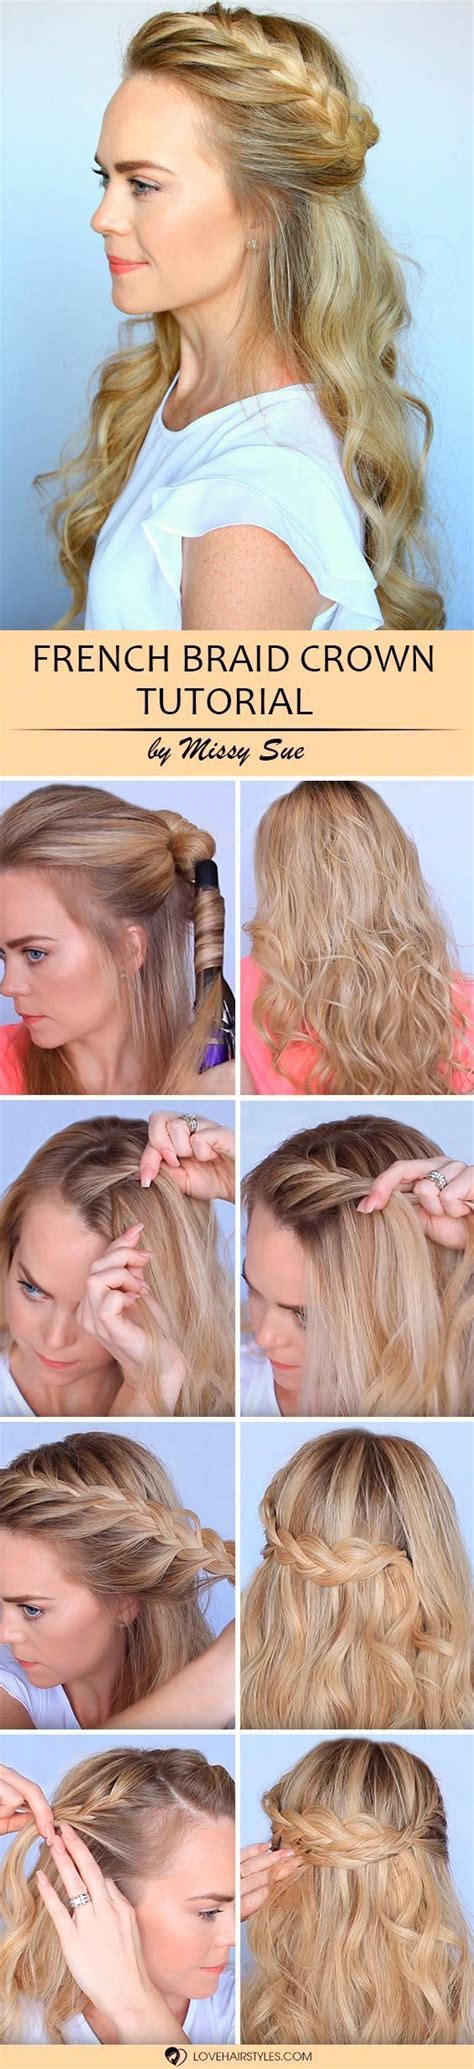 How to do different french braids styles tutorials for short, medium, and long hair. 26 Simple Tutorials To Braid Your Own Hair Perfectly ...